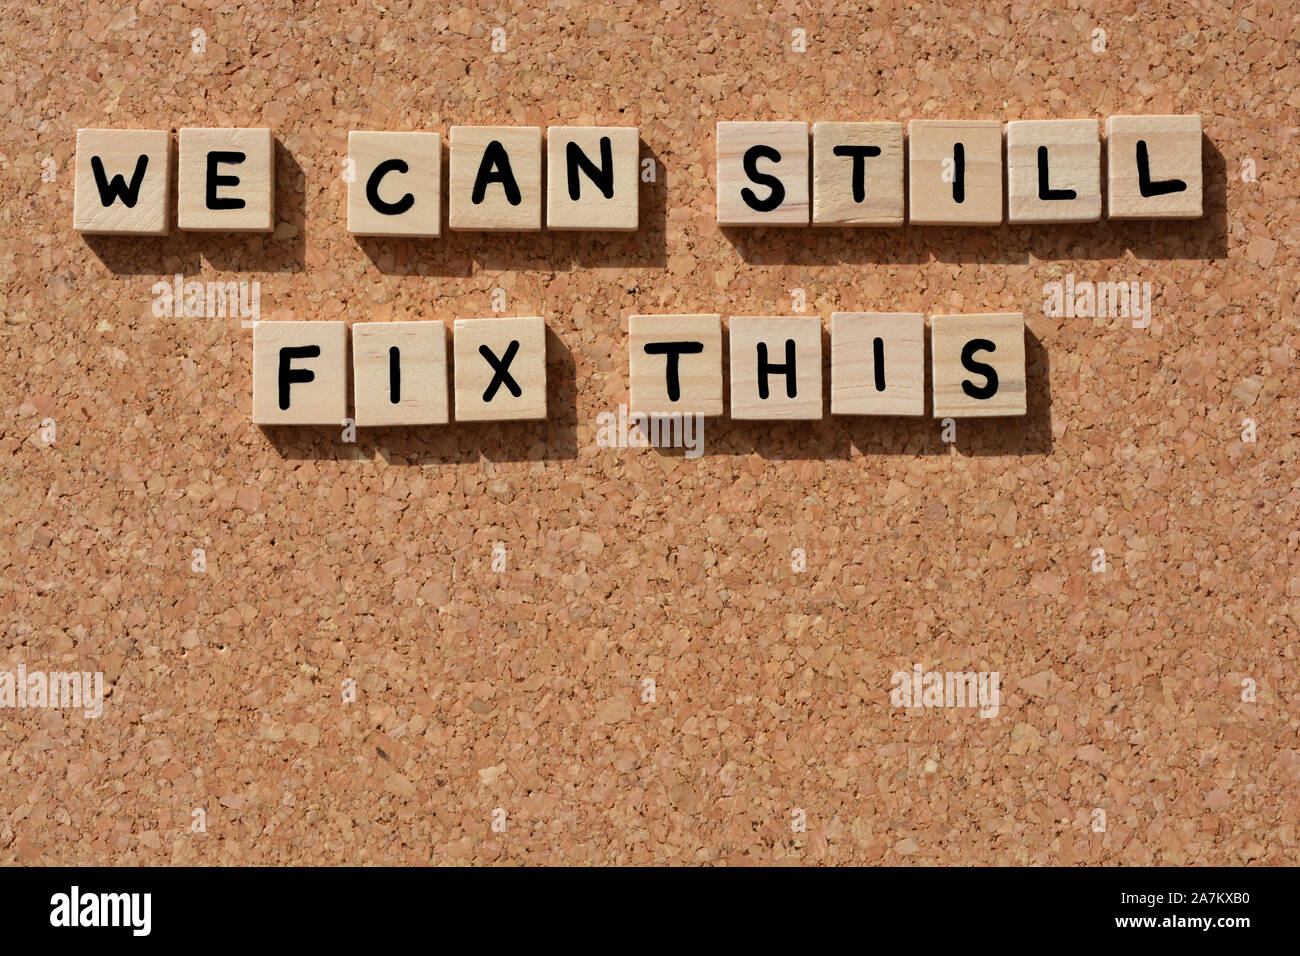 We Can Still Fix This, words in 3d wooden alphabet letters on a cork board background Stock Photo